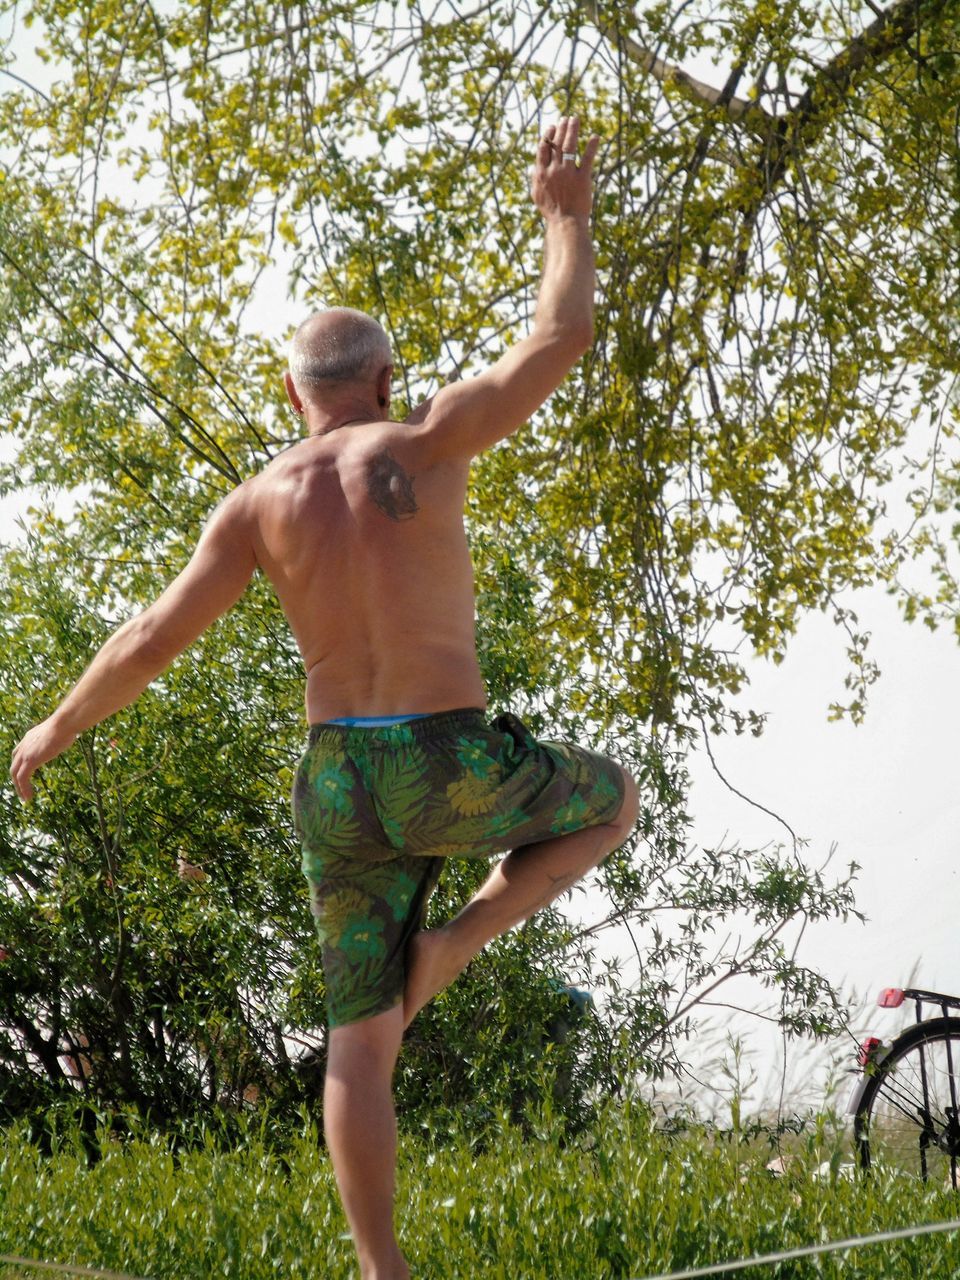 human arm, shirtless, plant, limb, human body part, arms raised, one person, leisure activity, body part, tree, lifestyles, men, day, human limb, nature, rear view, standing, real people, outdoors, shorts, excitement